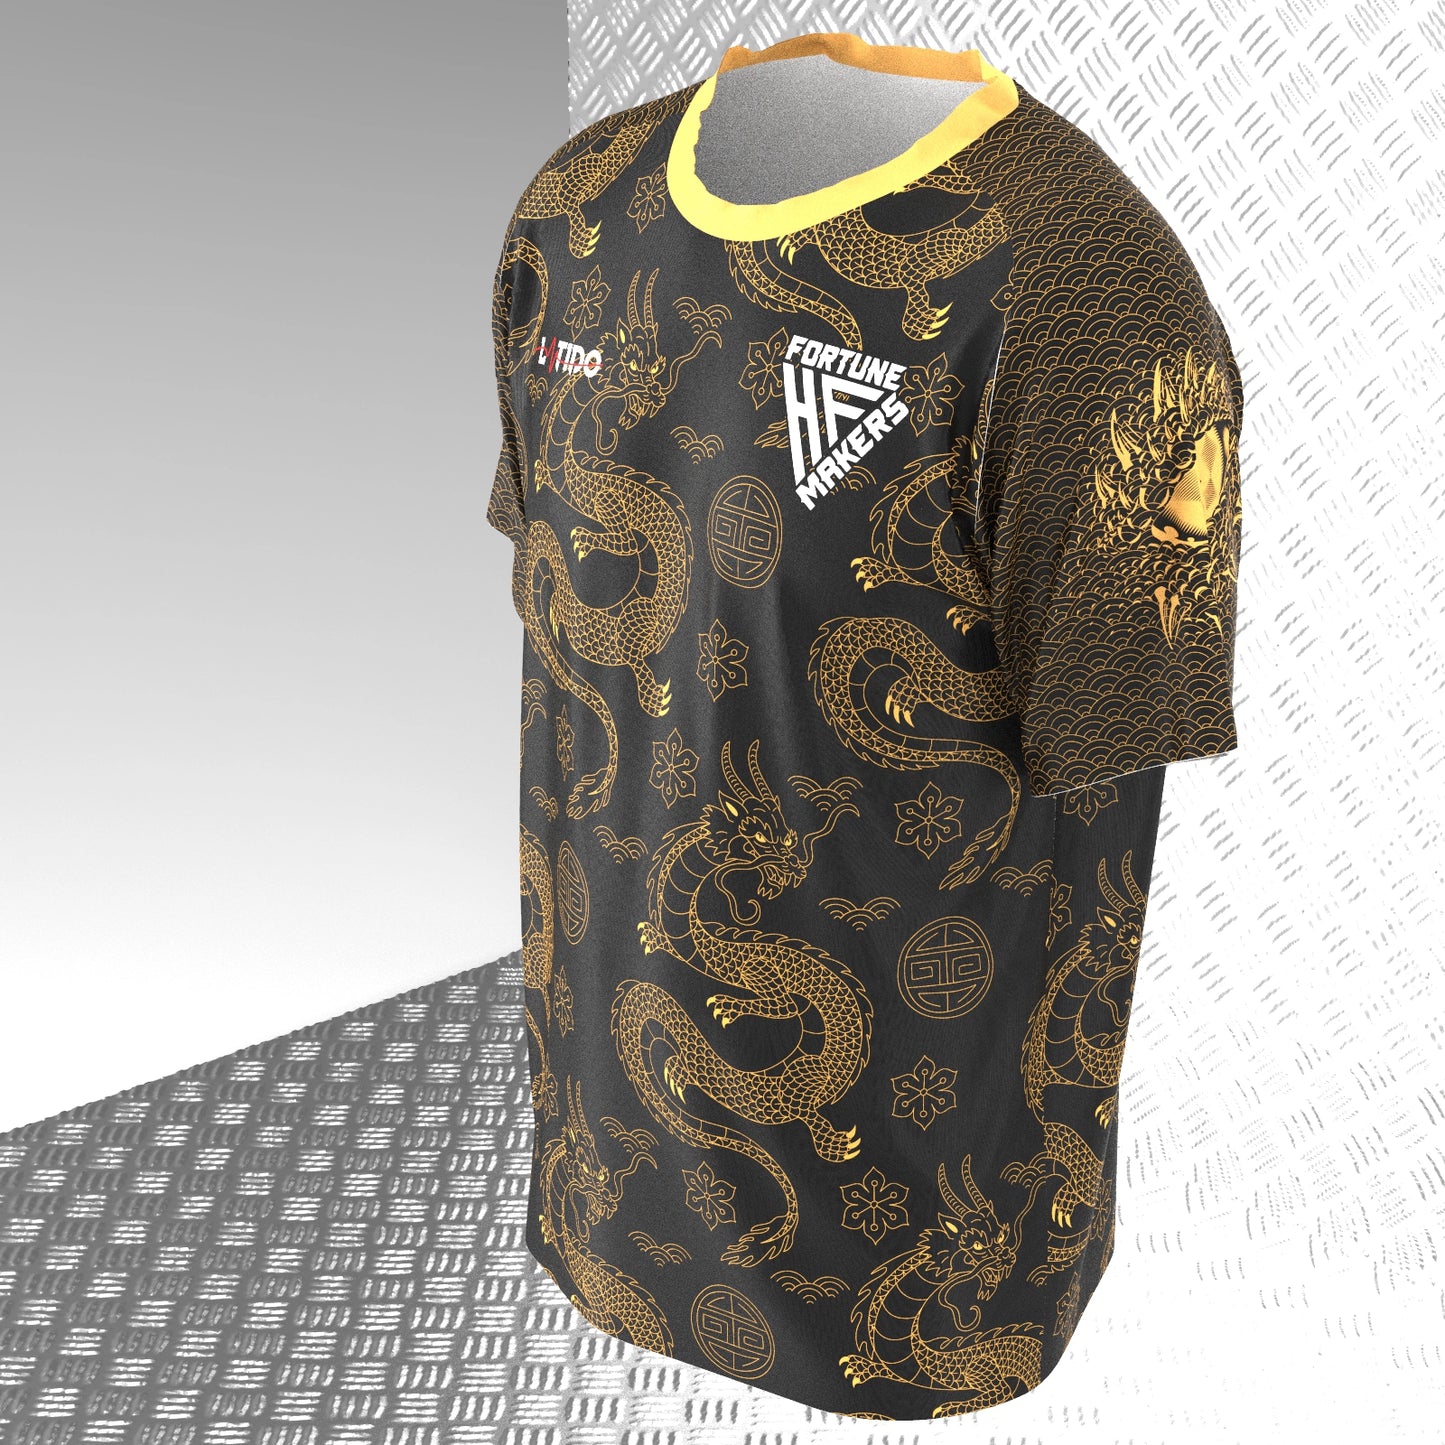 MotionTech Fortune Makers Jersey